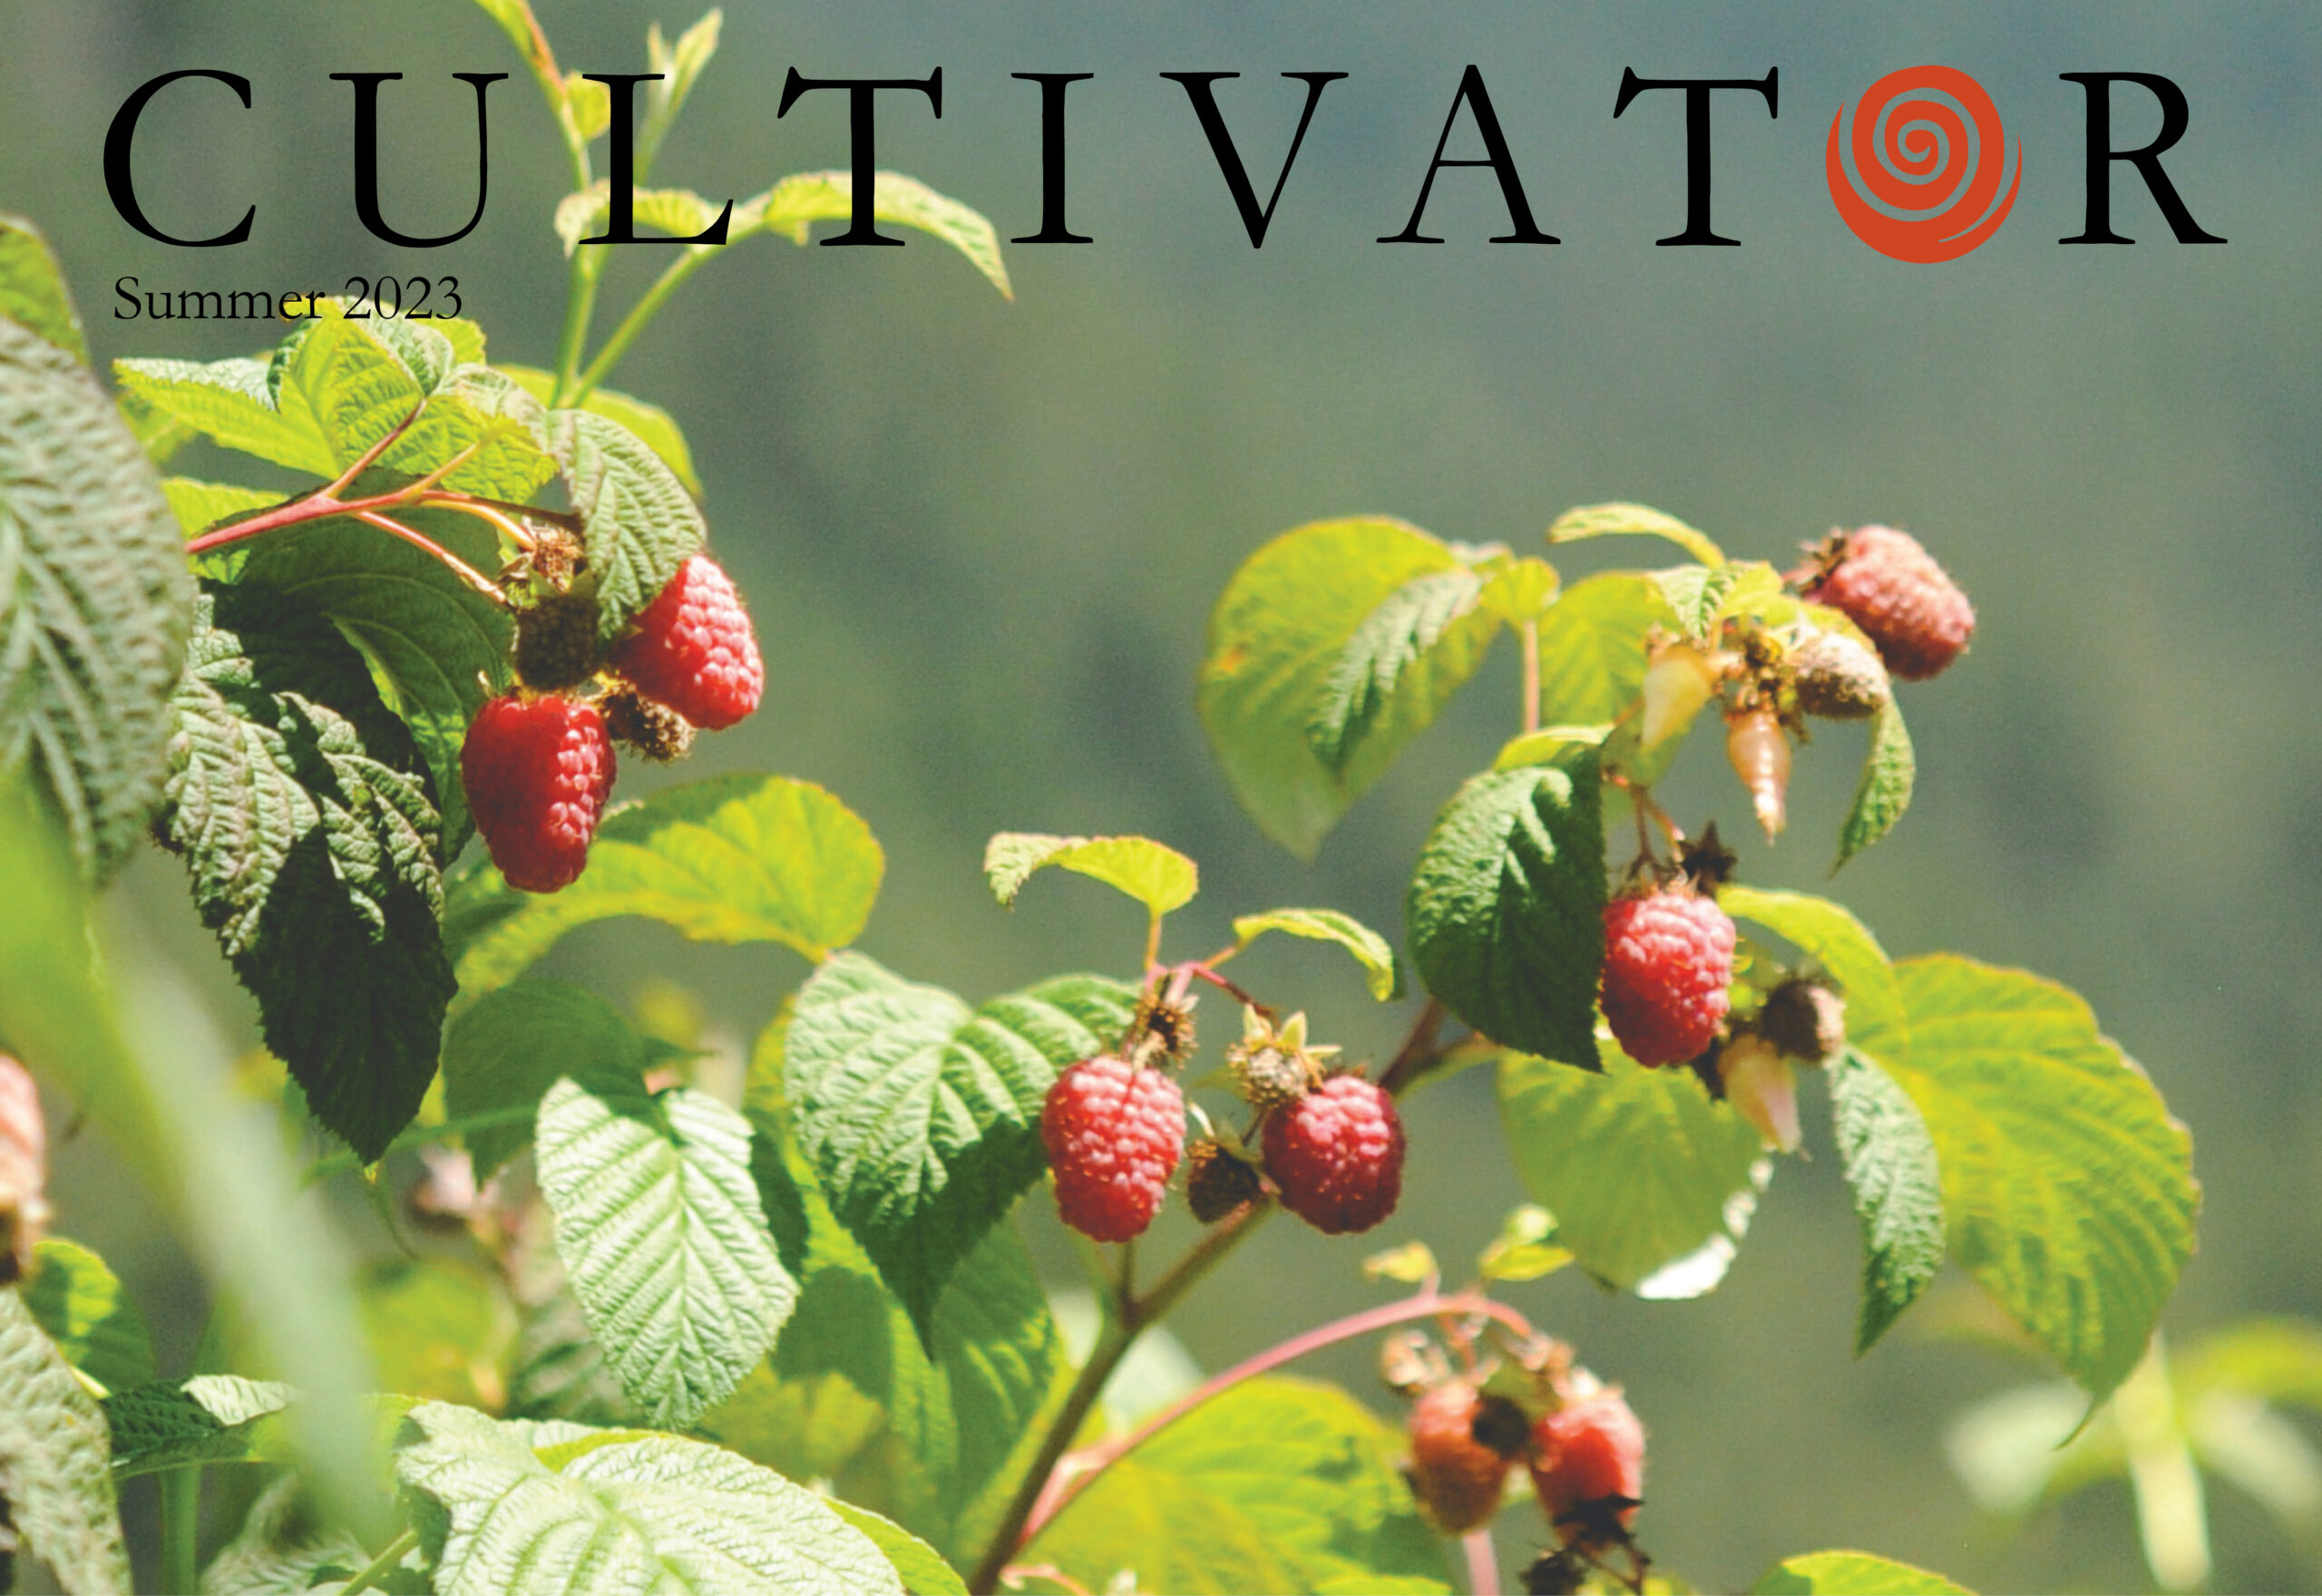 The Cultivator logo appears over an image of ripe raspberries